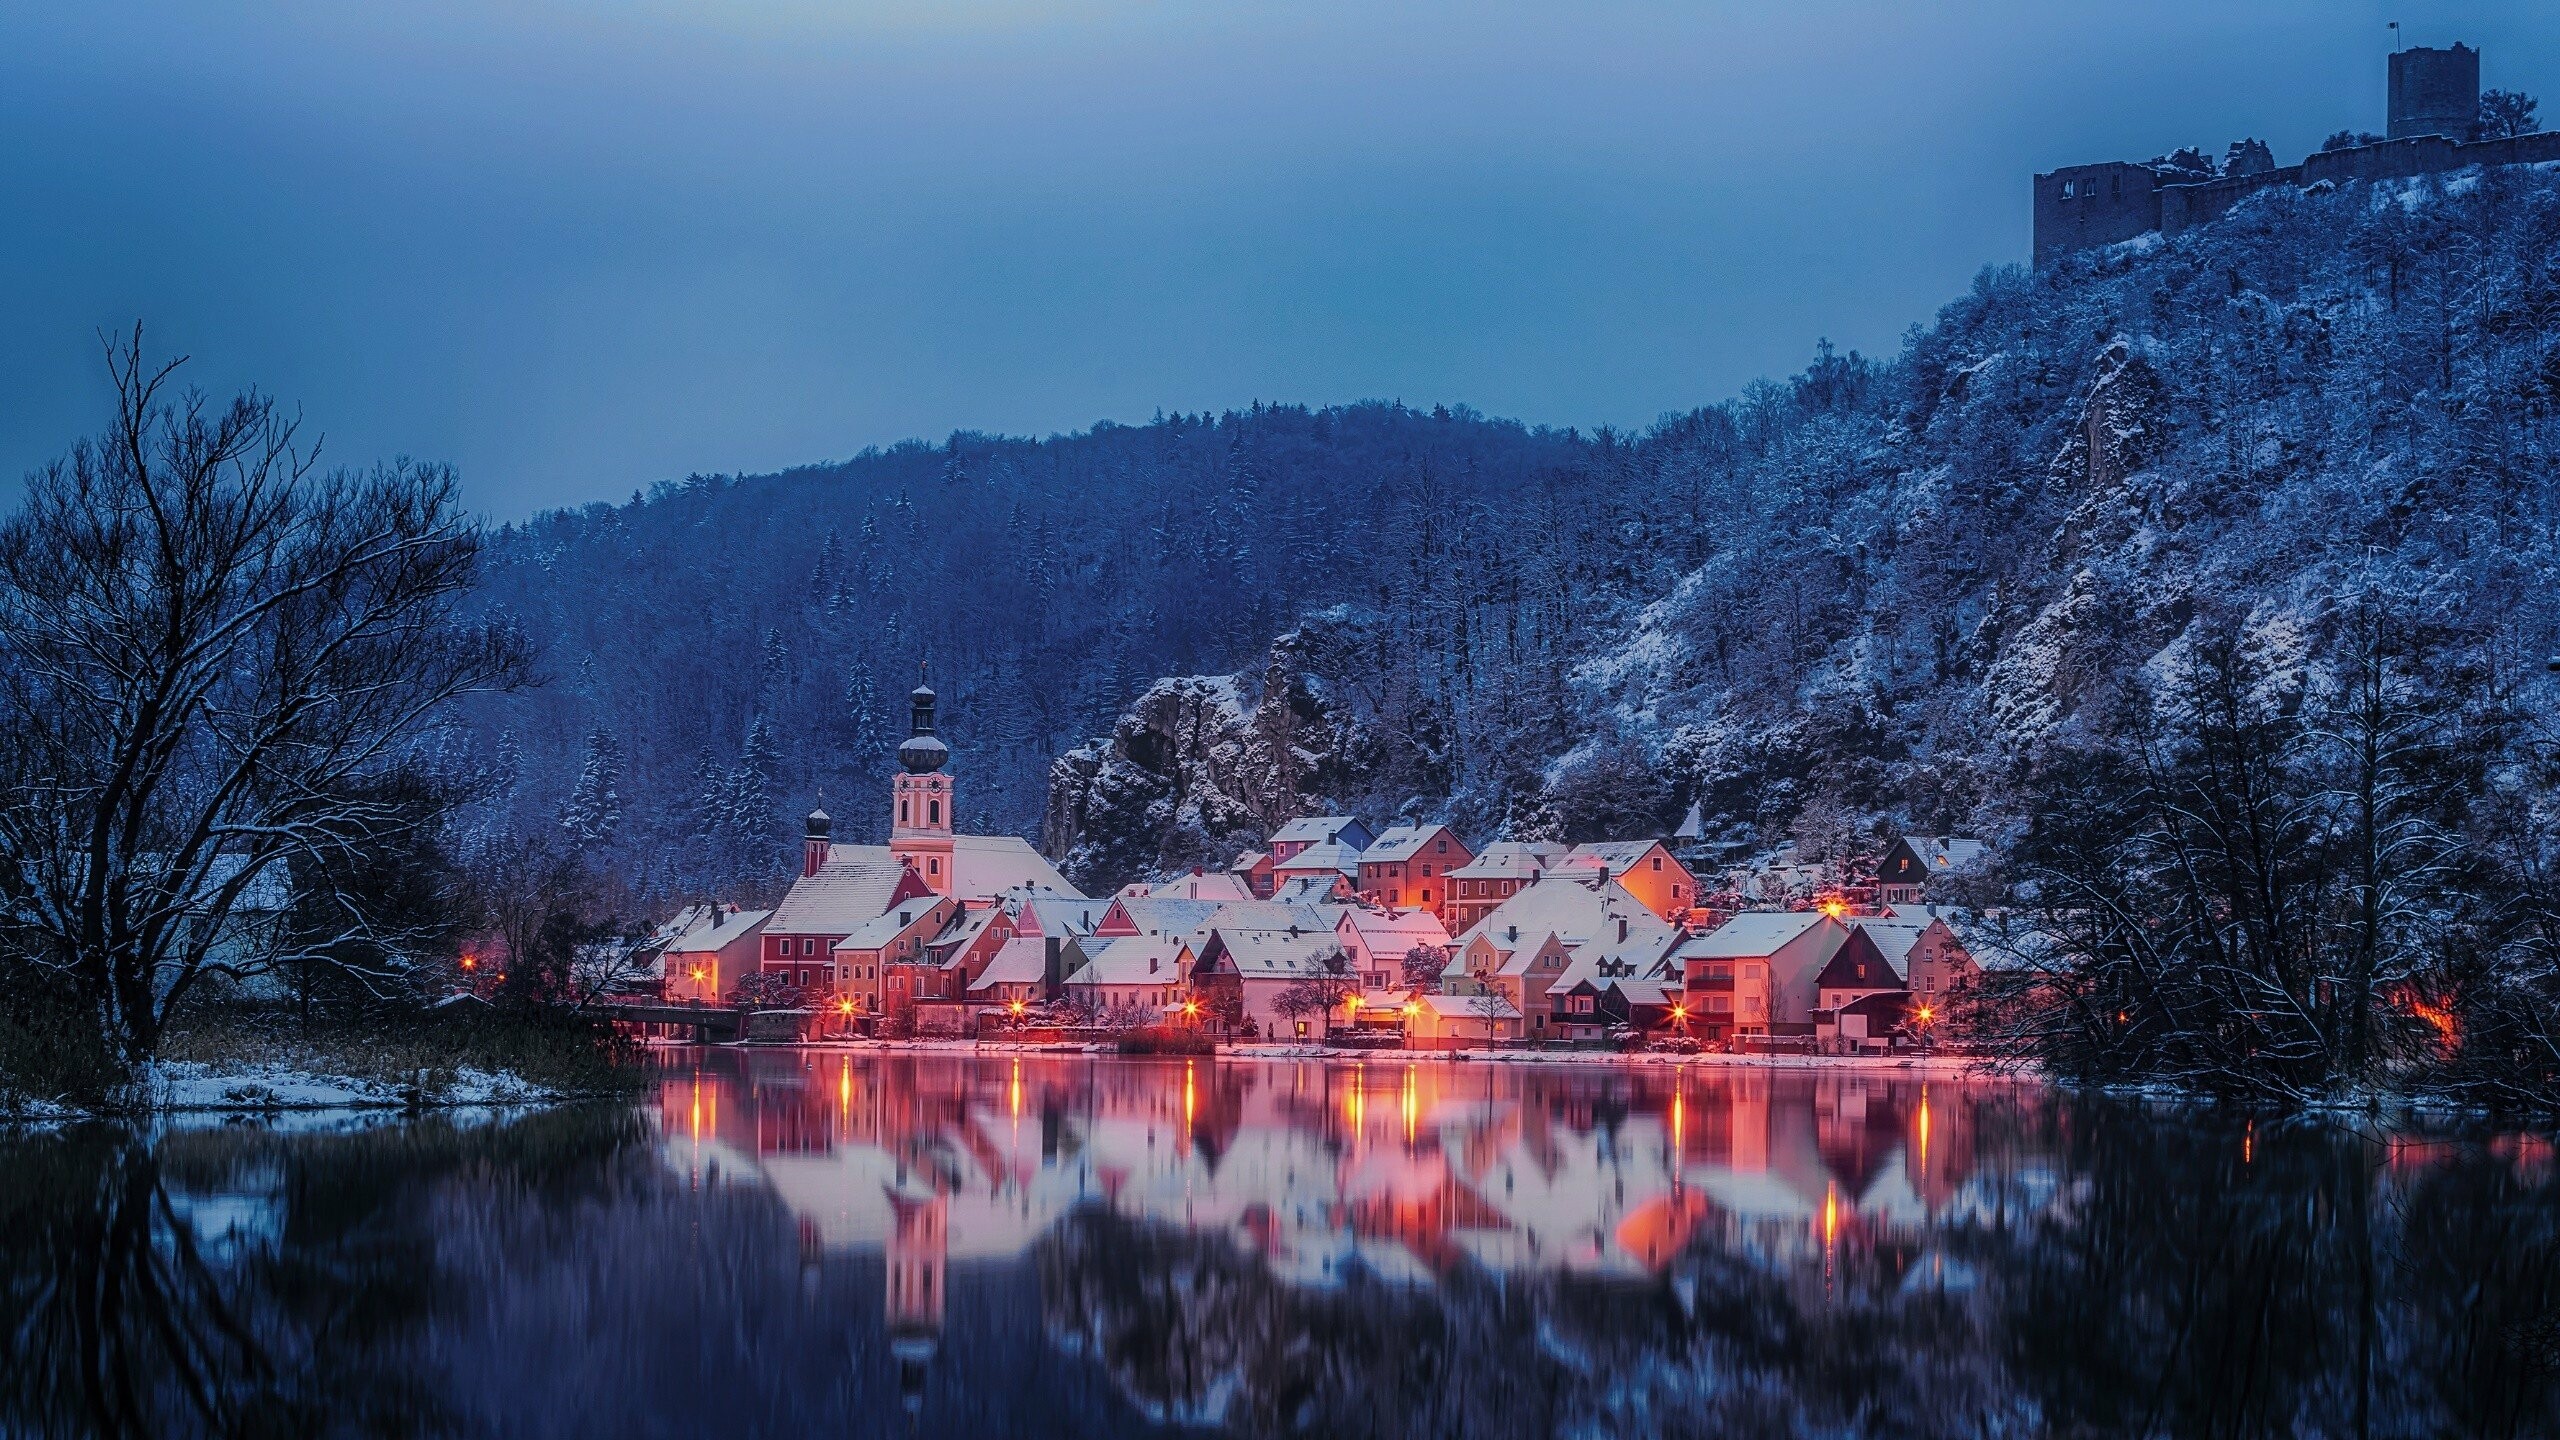 Germany Bavaria winter, HD wallpapers, Desktop and mobile images, Scenic beauty, 2560x1440 HD Desktop